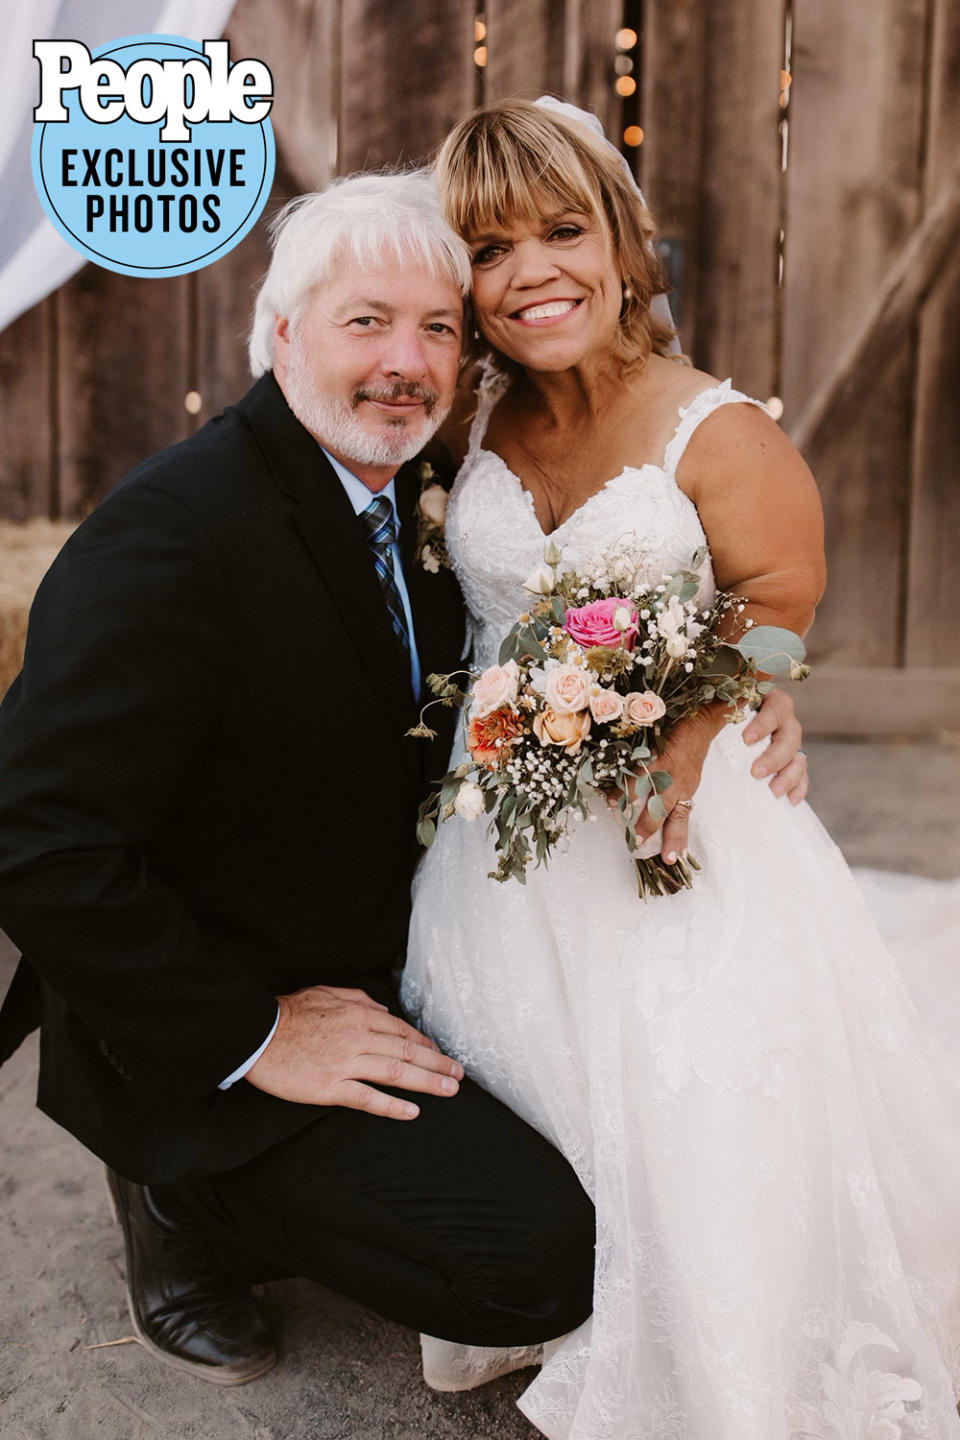 See the Celebratory Photos from Amy Roloff's Weekend Wedding to Chris Marek